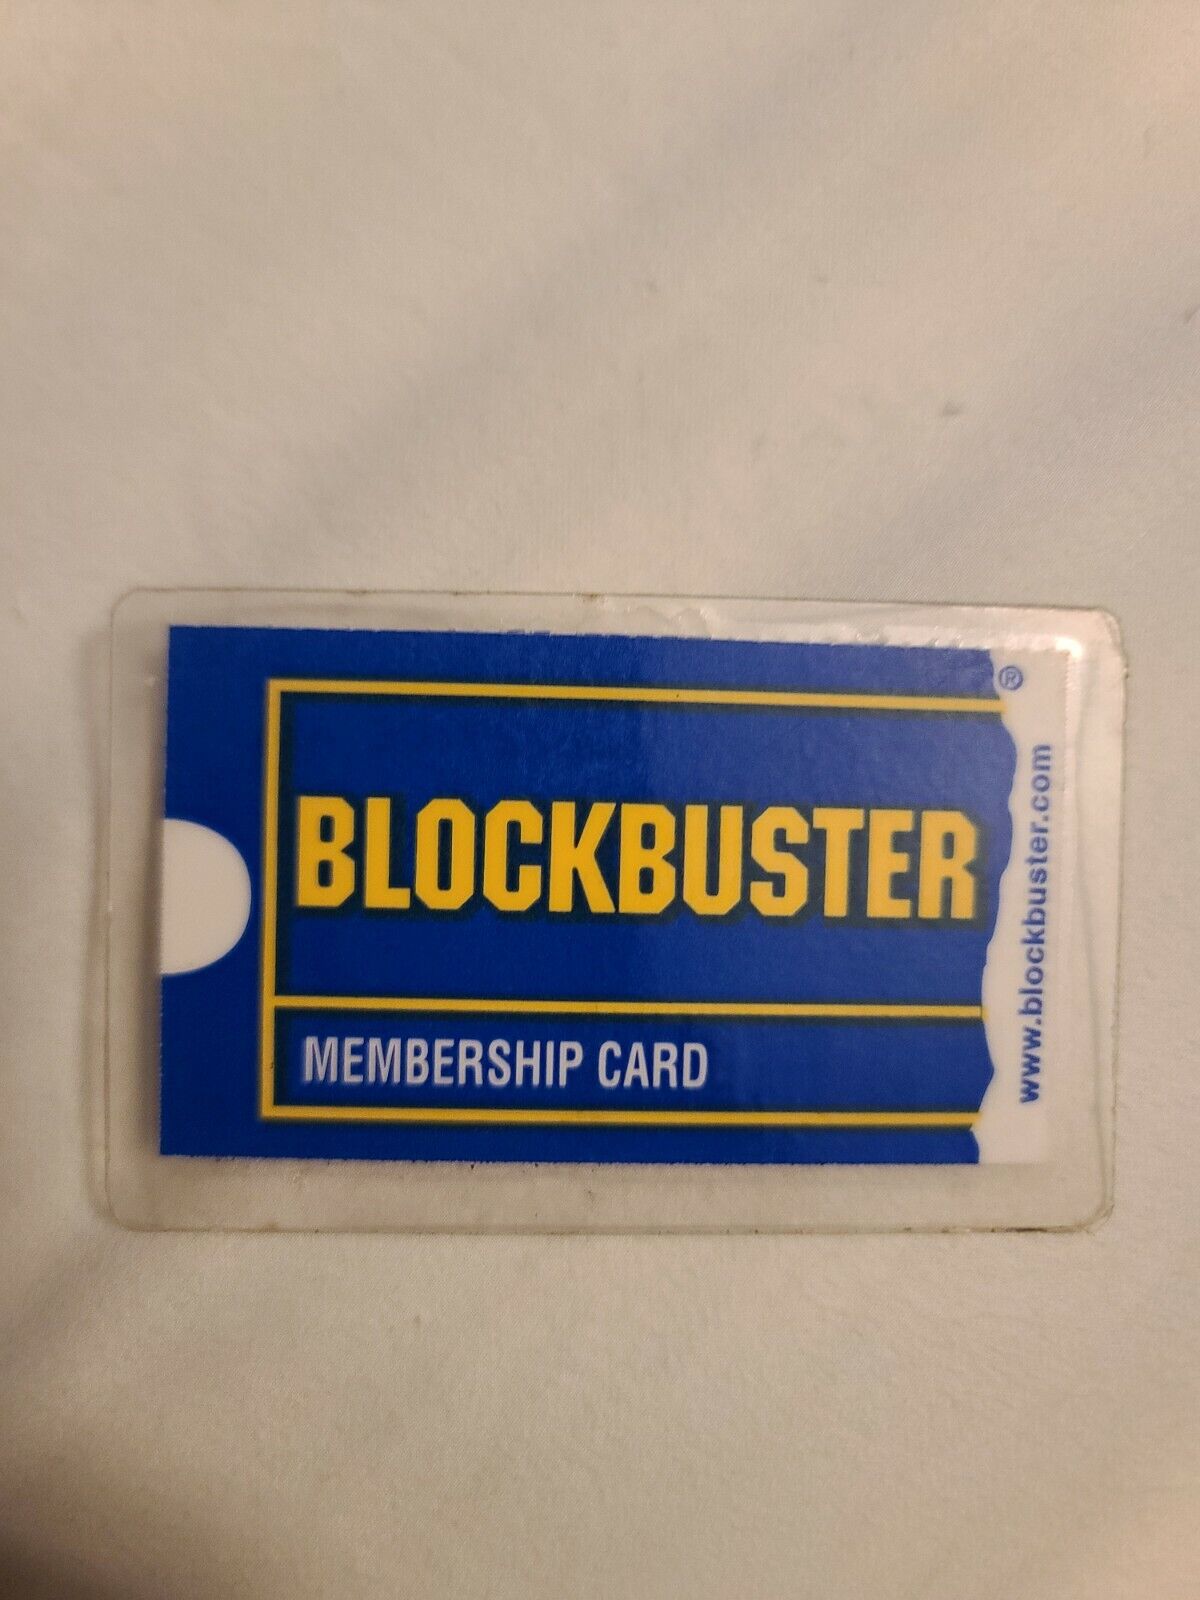 VINTAGE ONE OF A KIND EXTREMELY RARE BLOCKBUSTER VIDEO LAMINATED MEMBERSHIP CARD